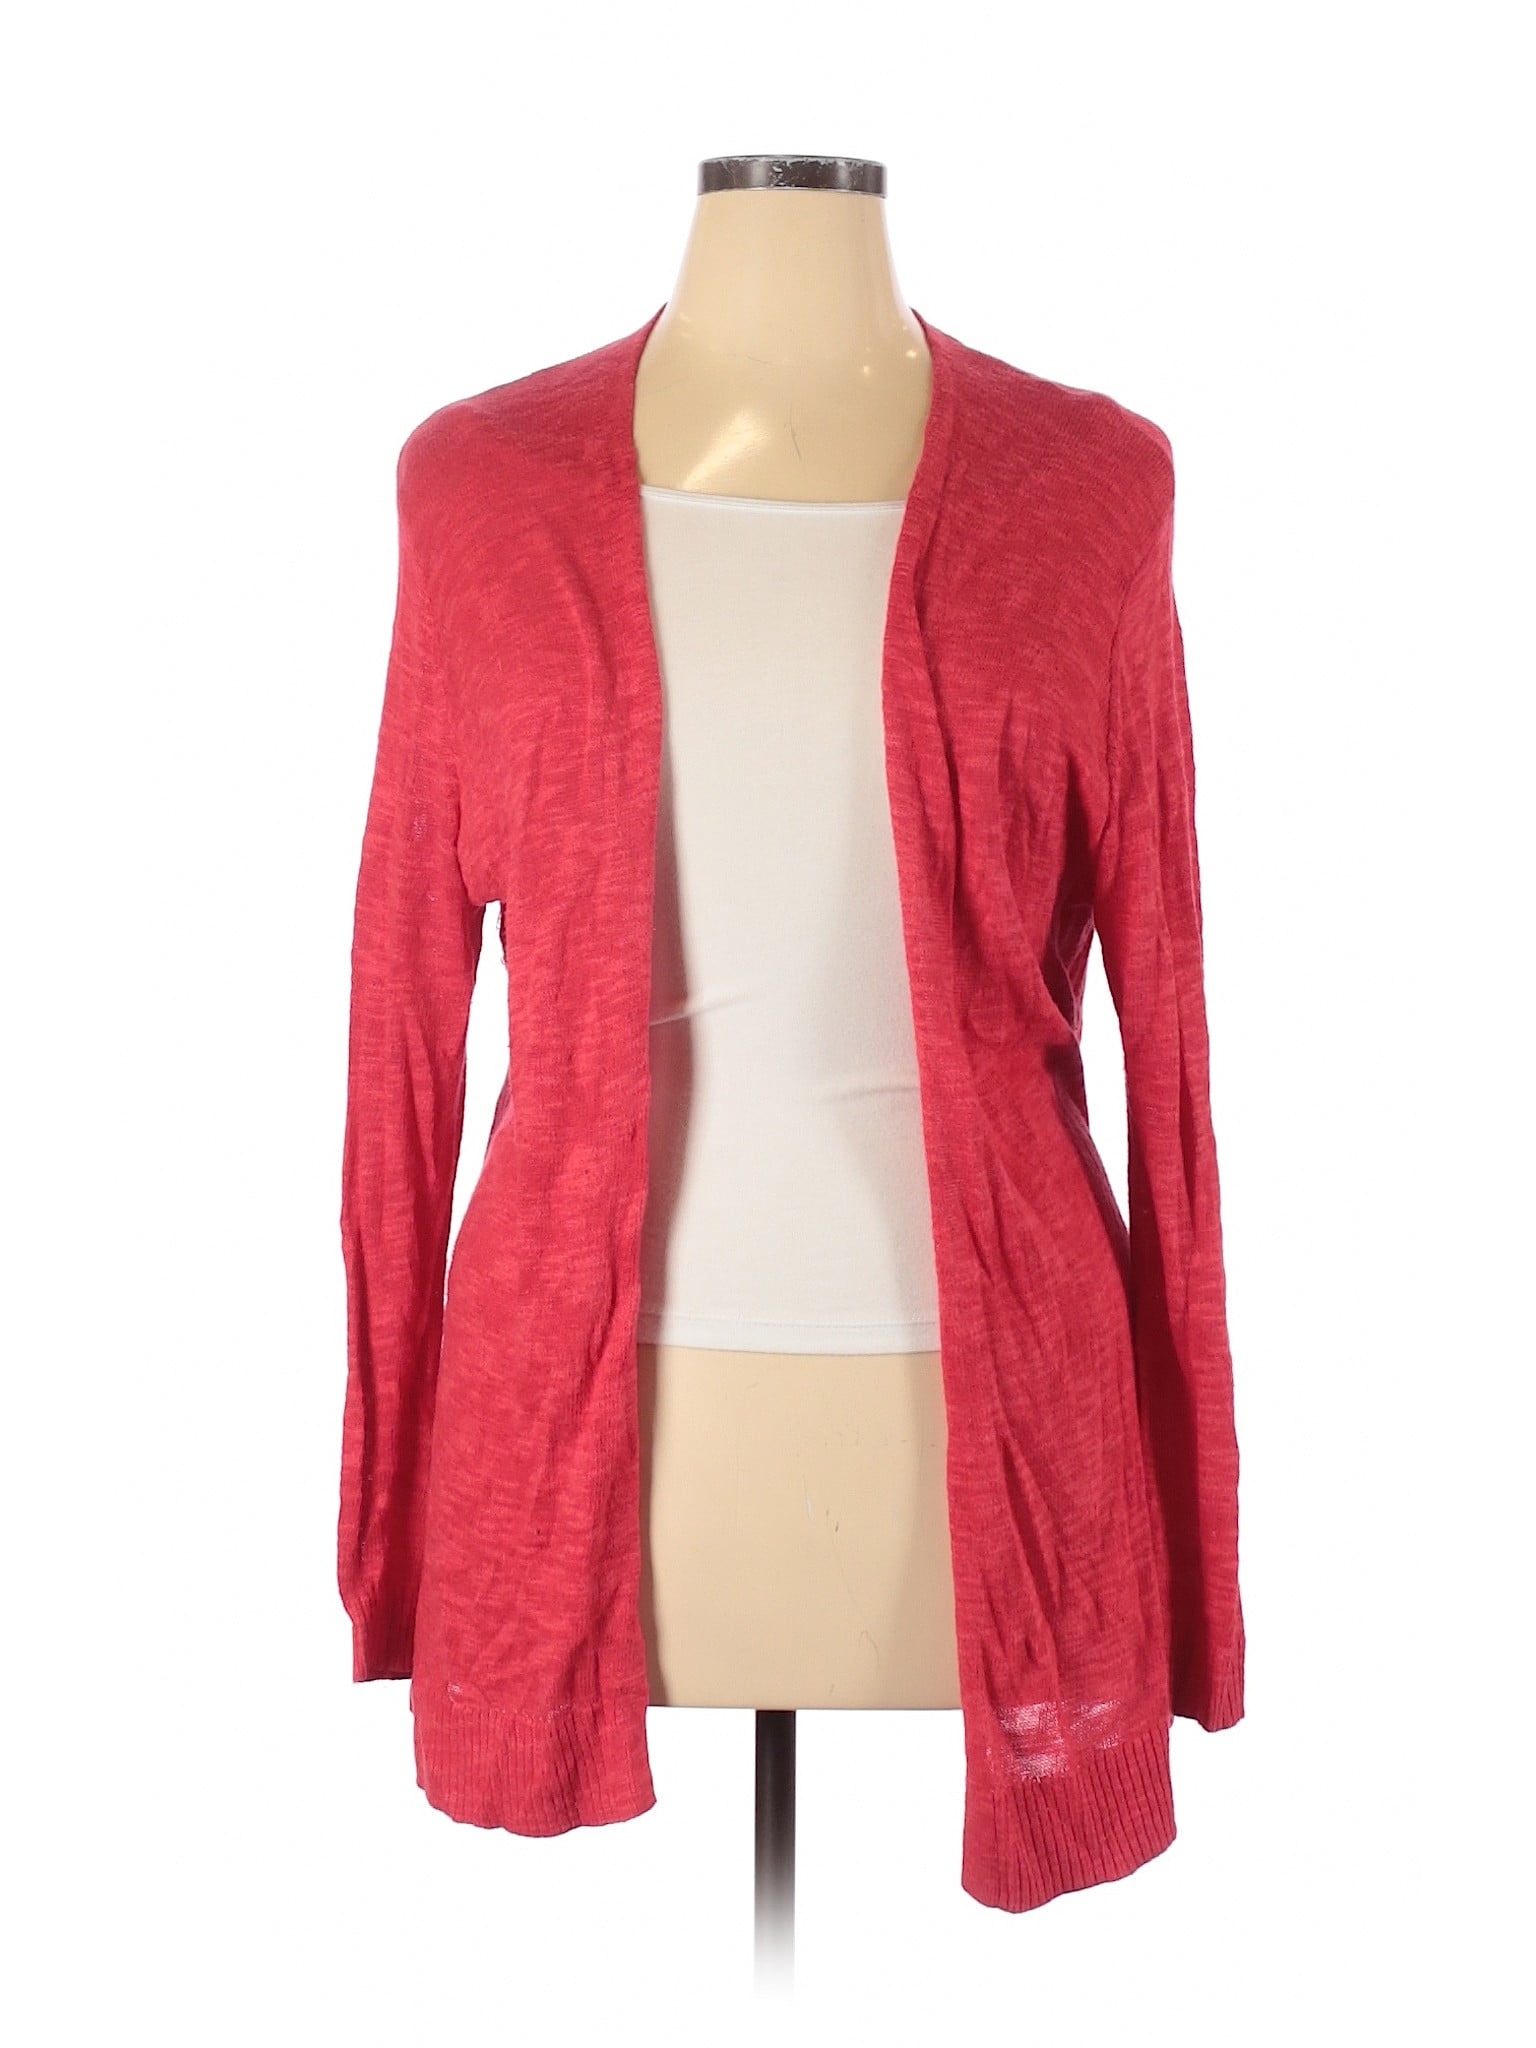 Gap Outlet - Pre-Owned Gap Outlet Women's Size XL Cardigan - Walmart ...